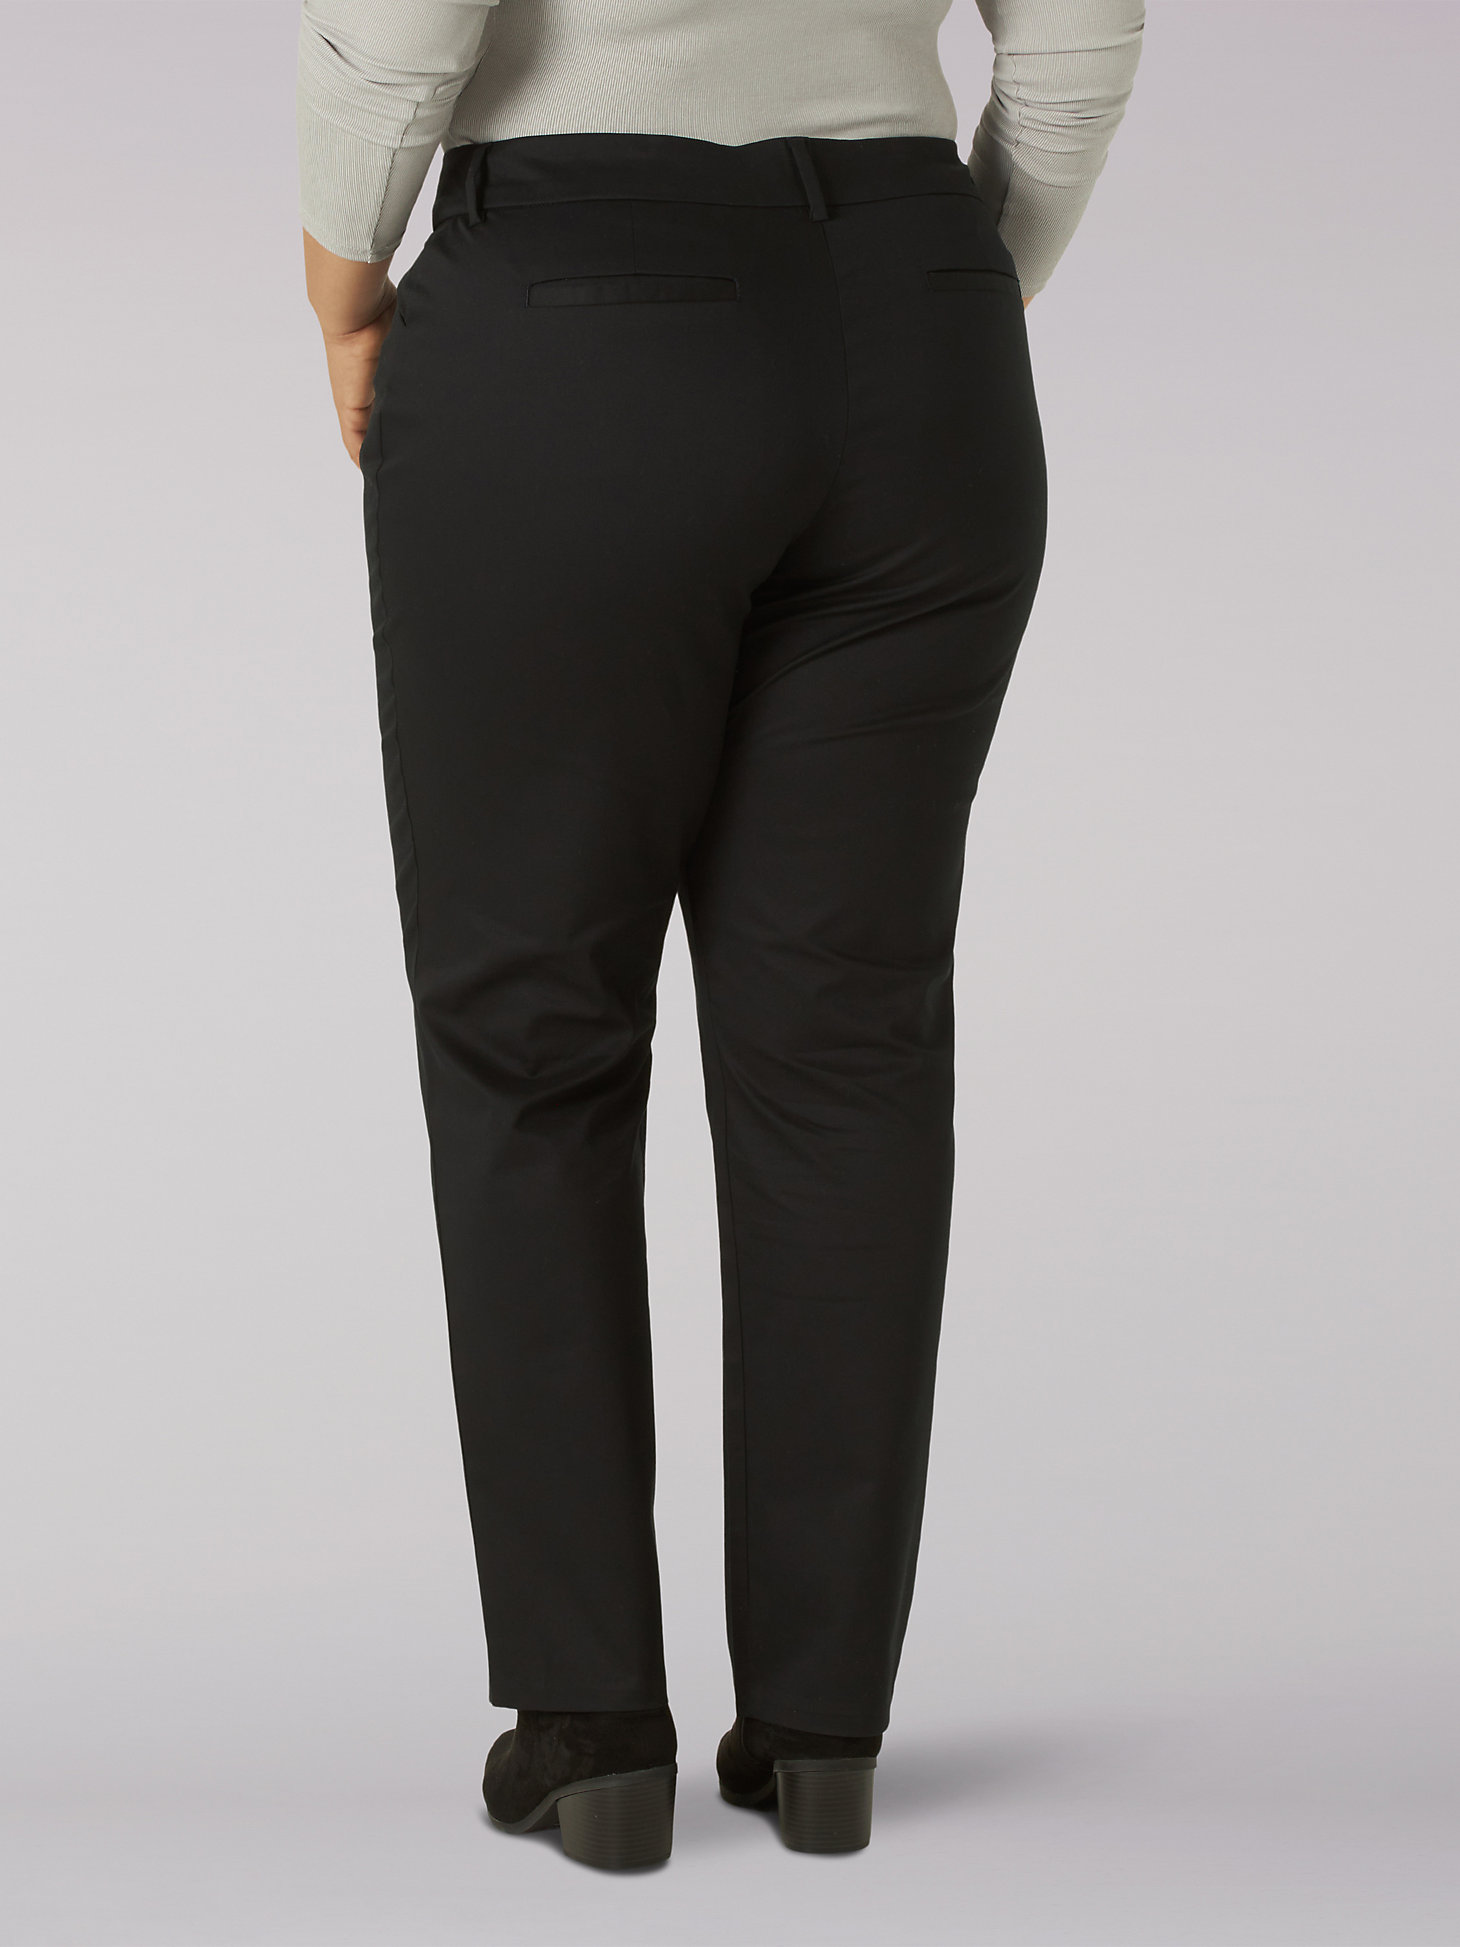 Women's Wrinkle Free Relaxed Fit Straight Leg Pant (Plus) in Black alternative view 1